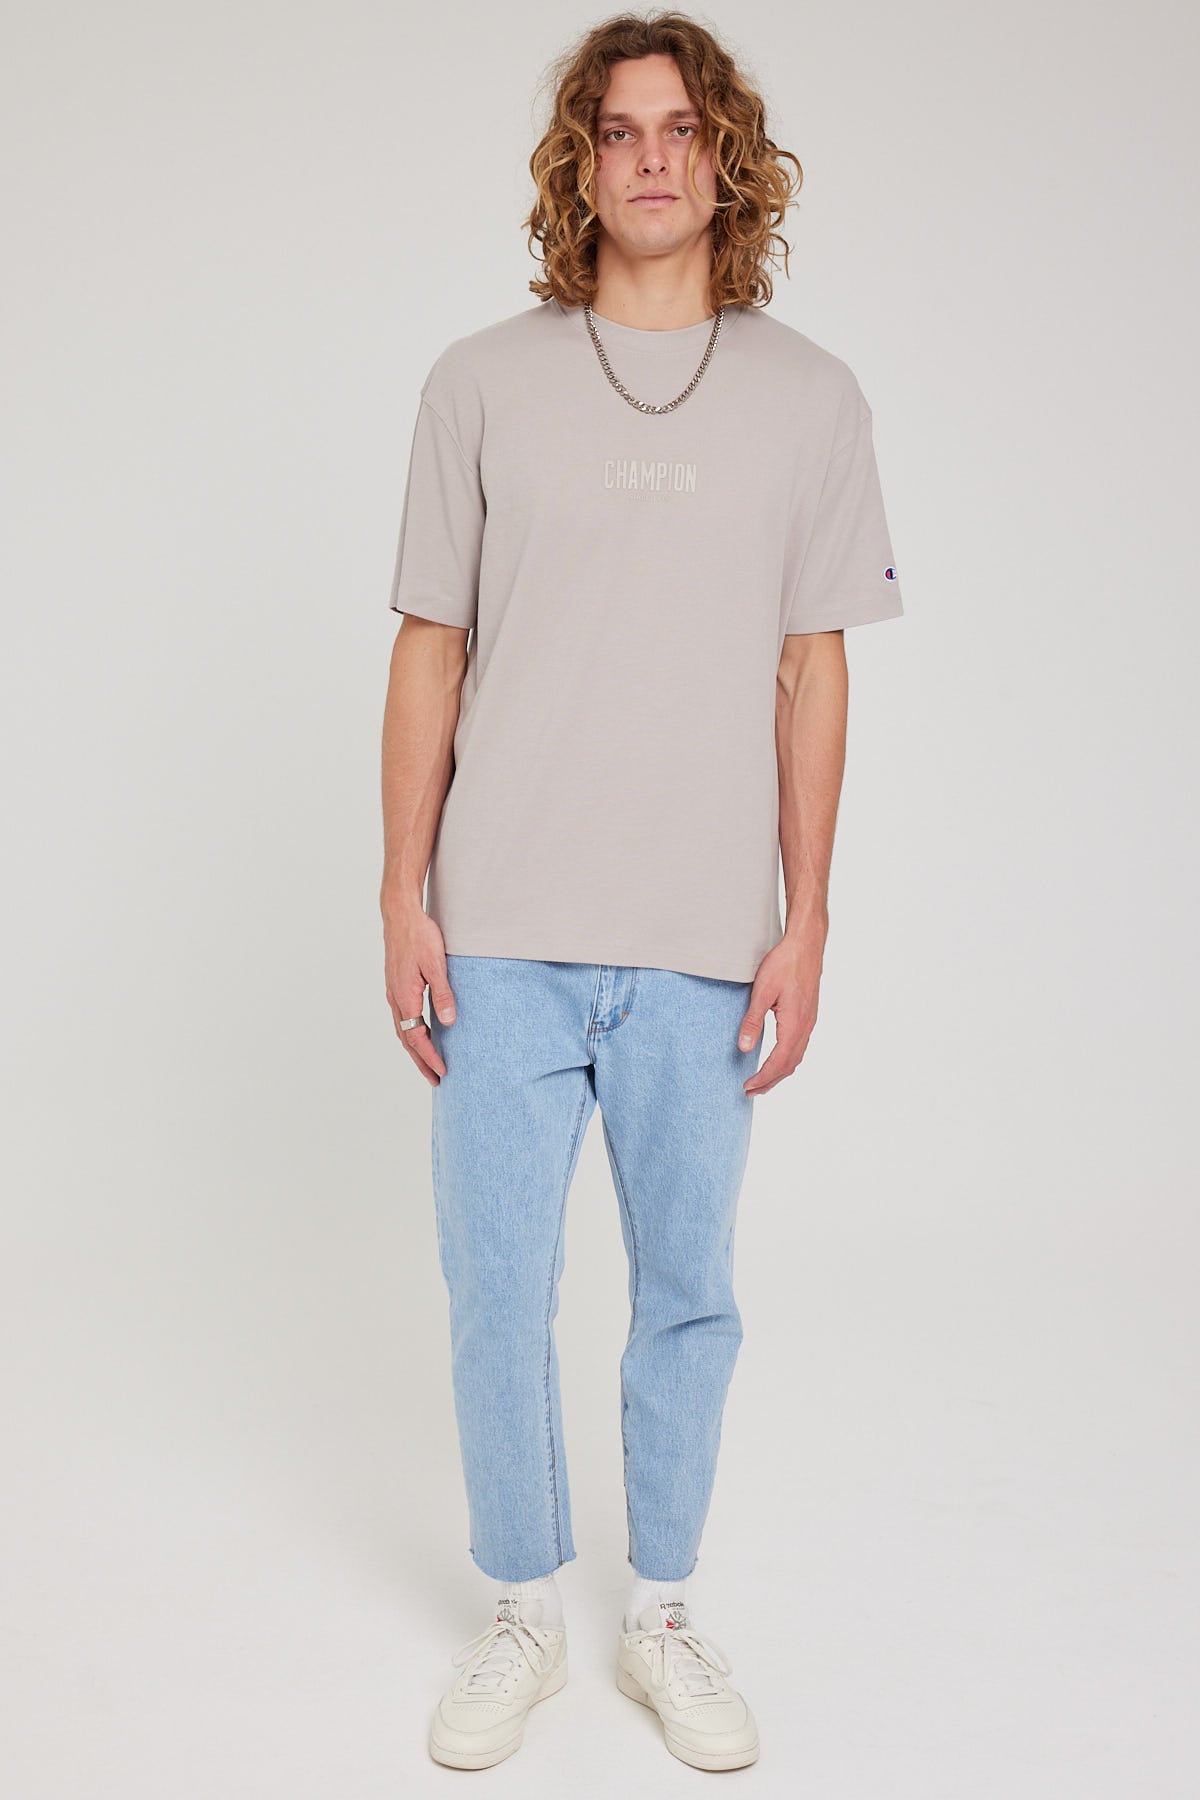 Champion Rochester Base Tee Pearl Oyster